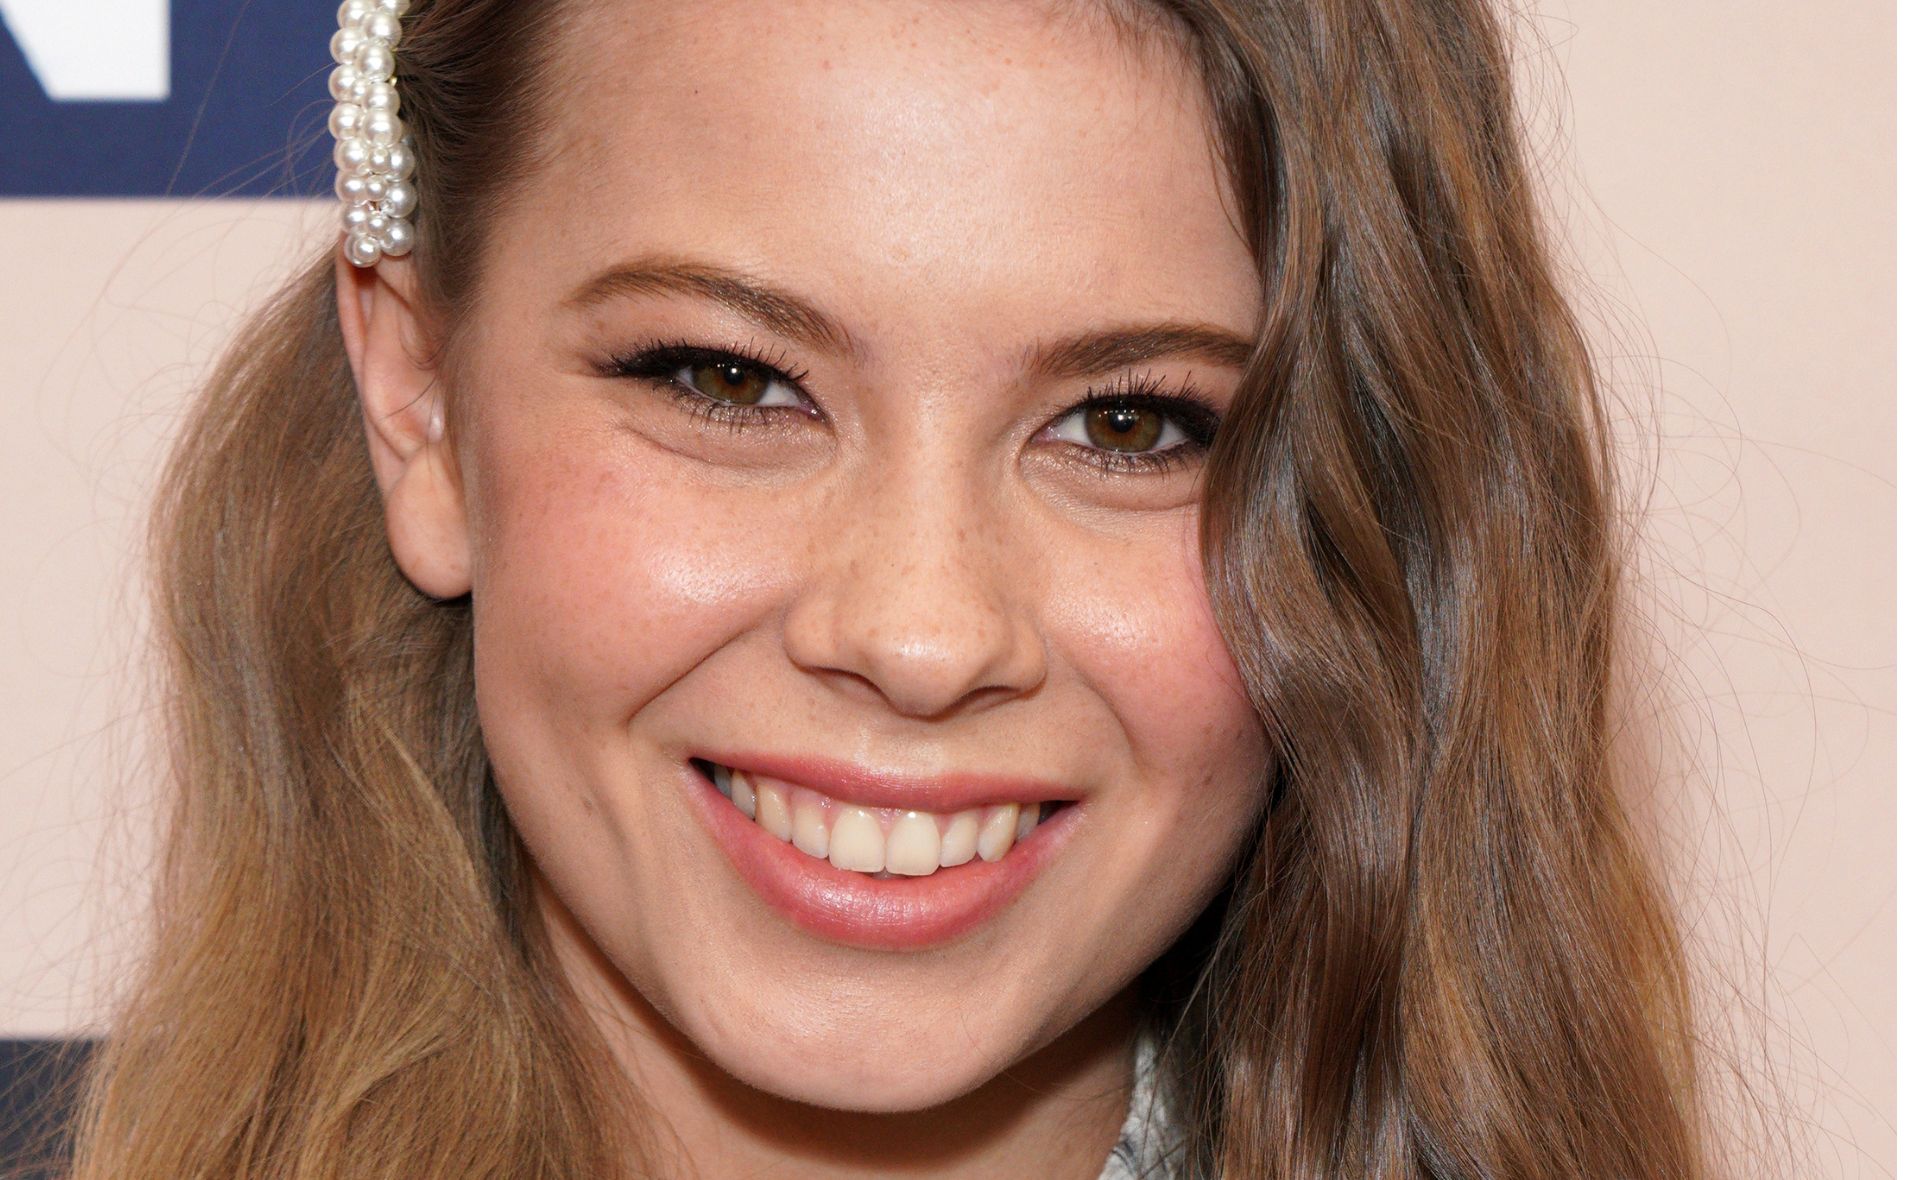 She’s your girl next door! Bindi Irwin’s wholesome beauty transformations over the years